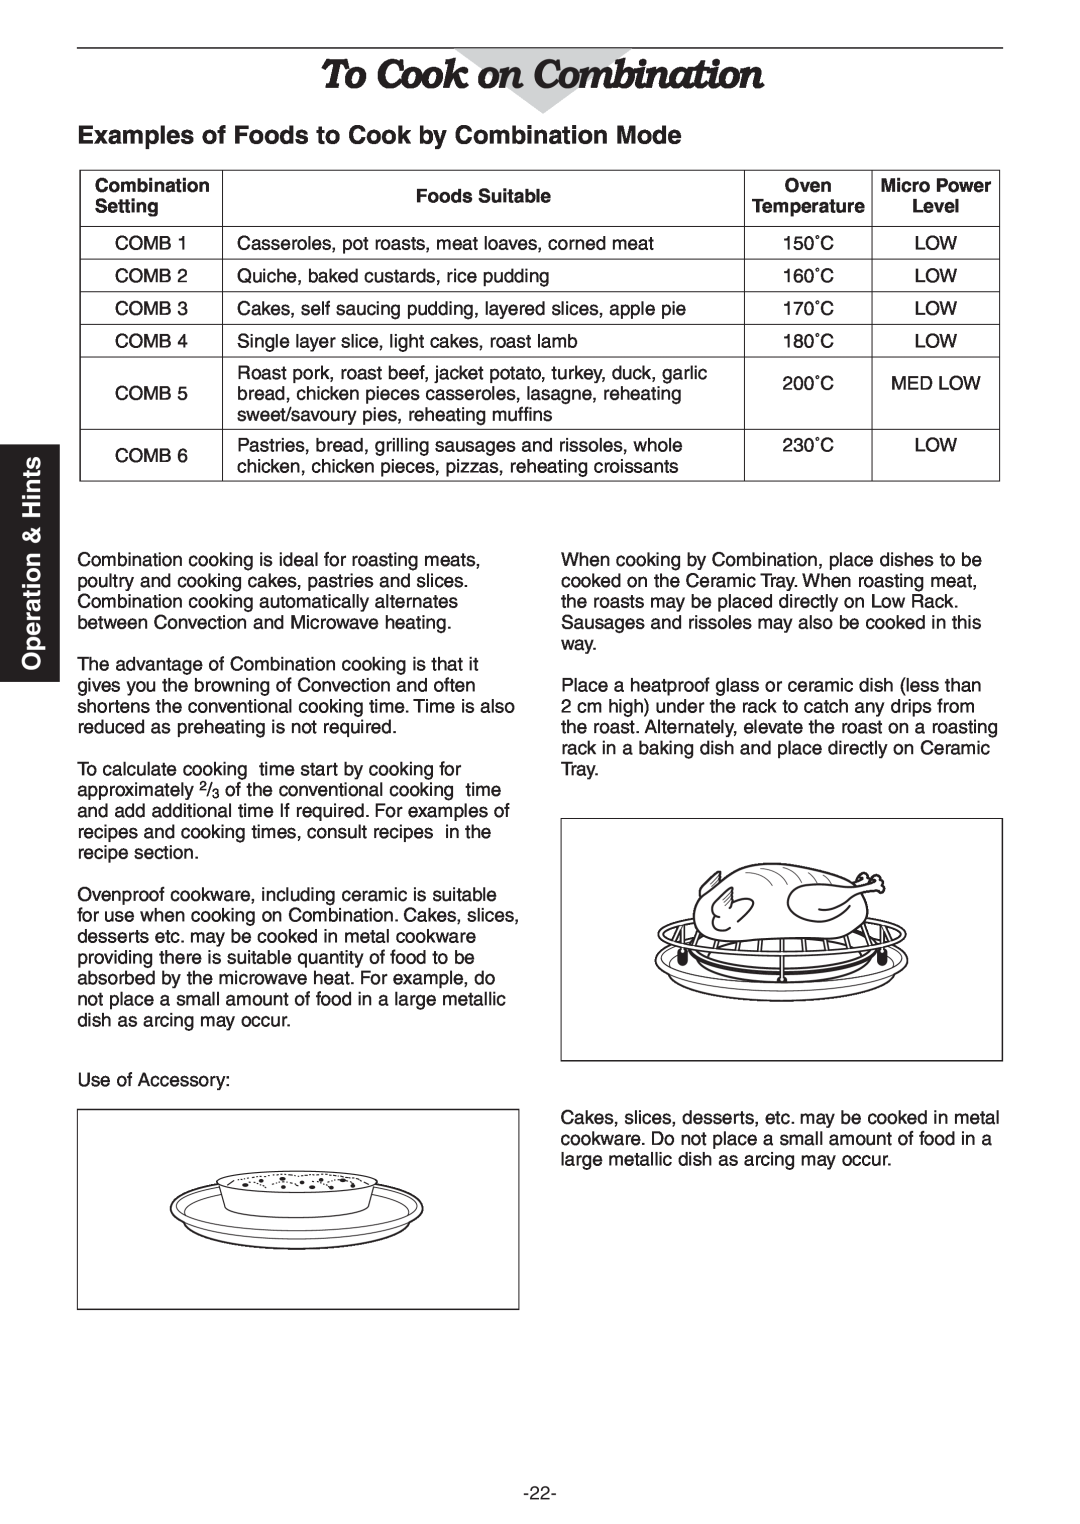 Panasonic NN-CD987W, NN-CD997S Hints, Examples of Foods to Cook by Combination Mode, Operation, To Cook on Combination 